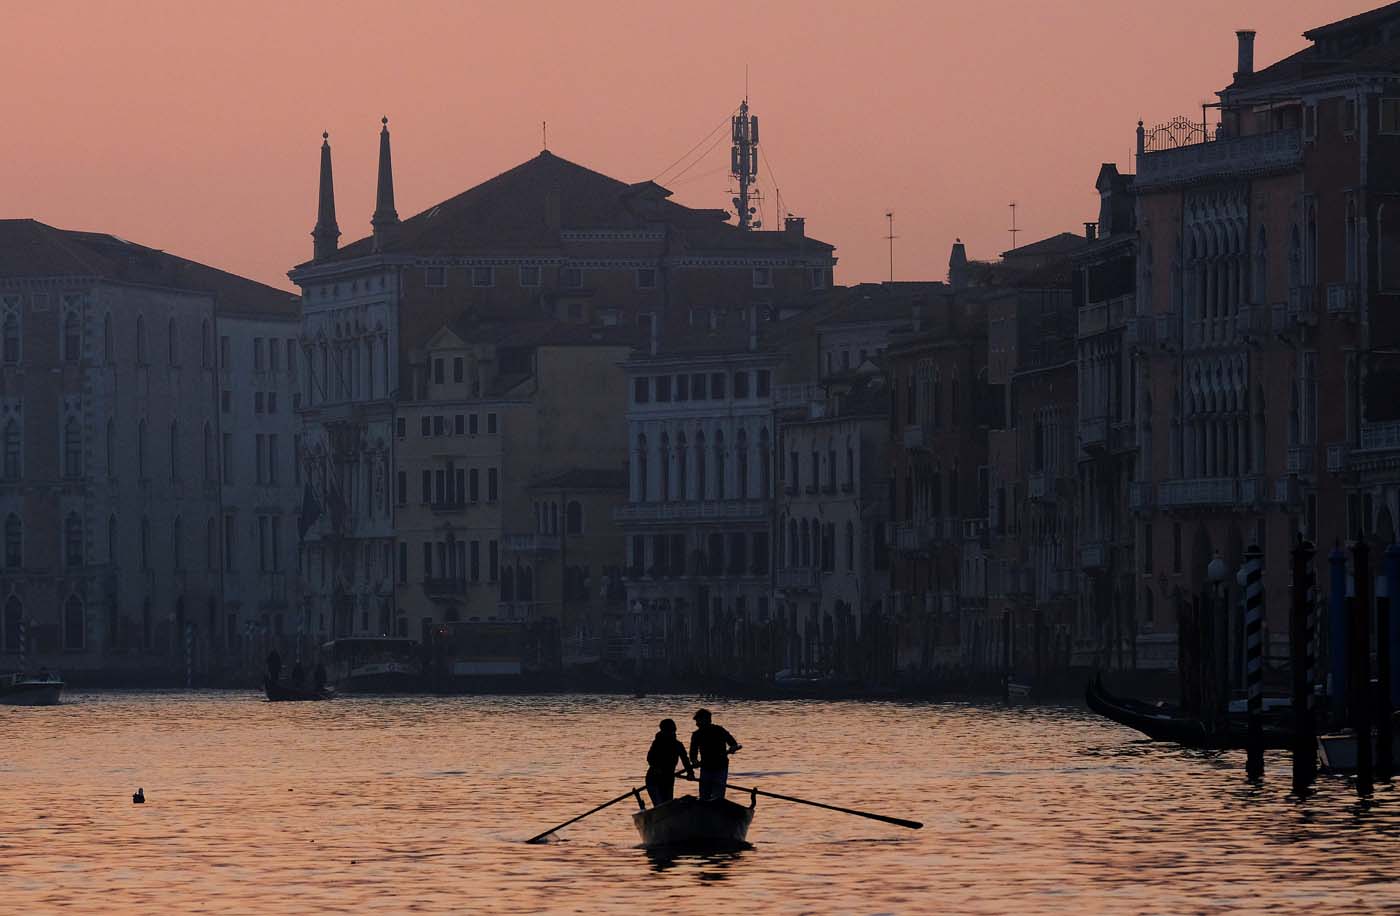 People row on Grand Canal in Venice, Italy January 28, 2018. REUTERS/Manuel Silvestri